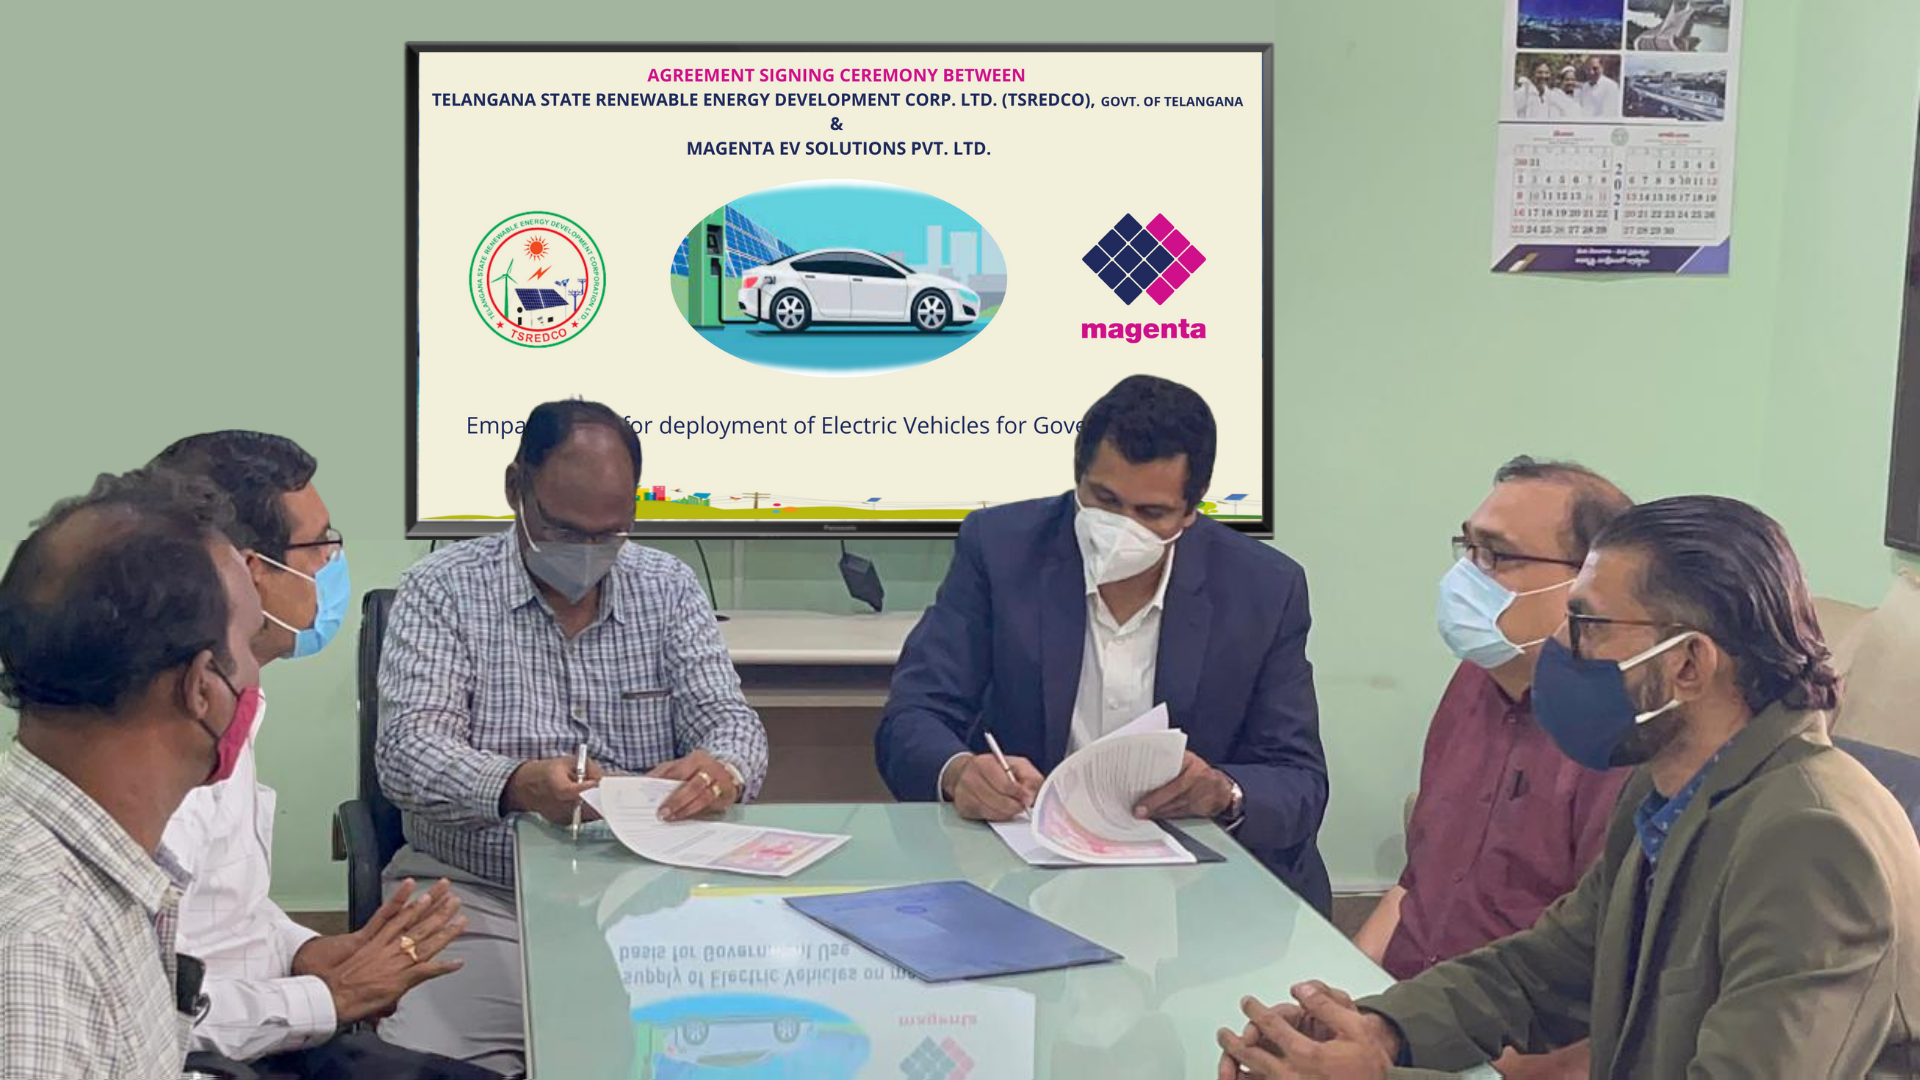 Magenta Signs Agreement With TSREDCO (Telangana State Renewable Energy Development Corporation Limited), Government of Telangana For Deploying Electric Vehicles For Government Use Under the Go Electric Campaign